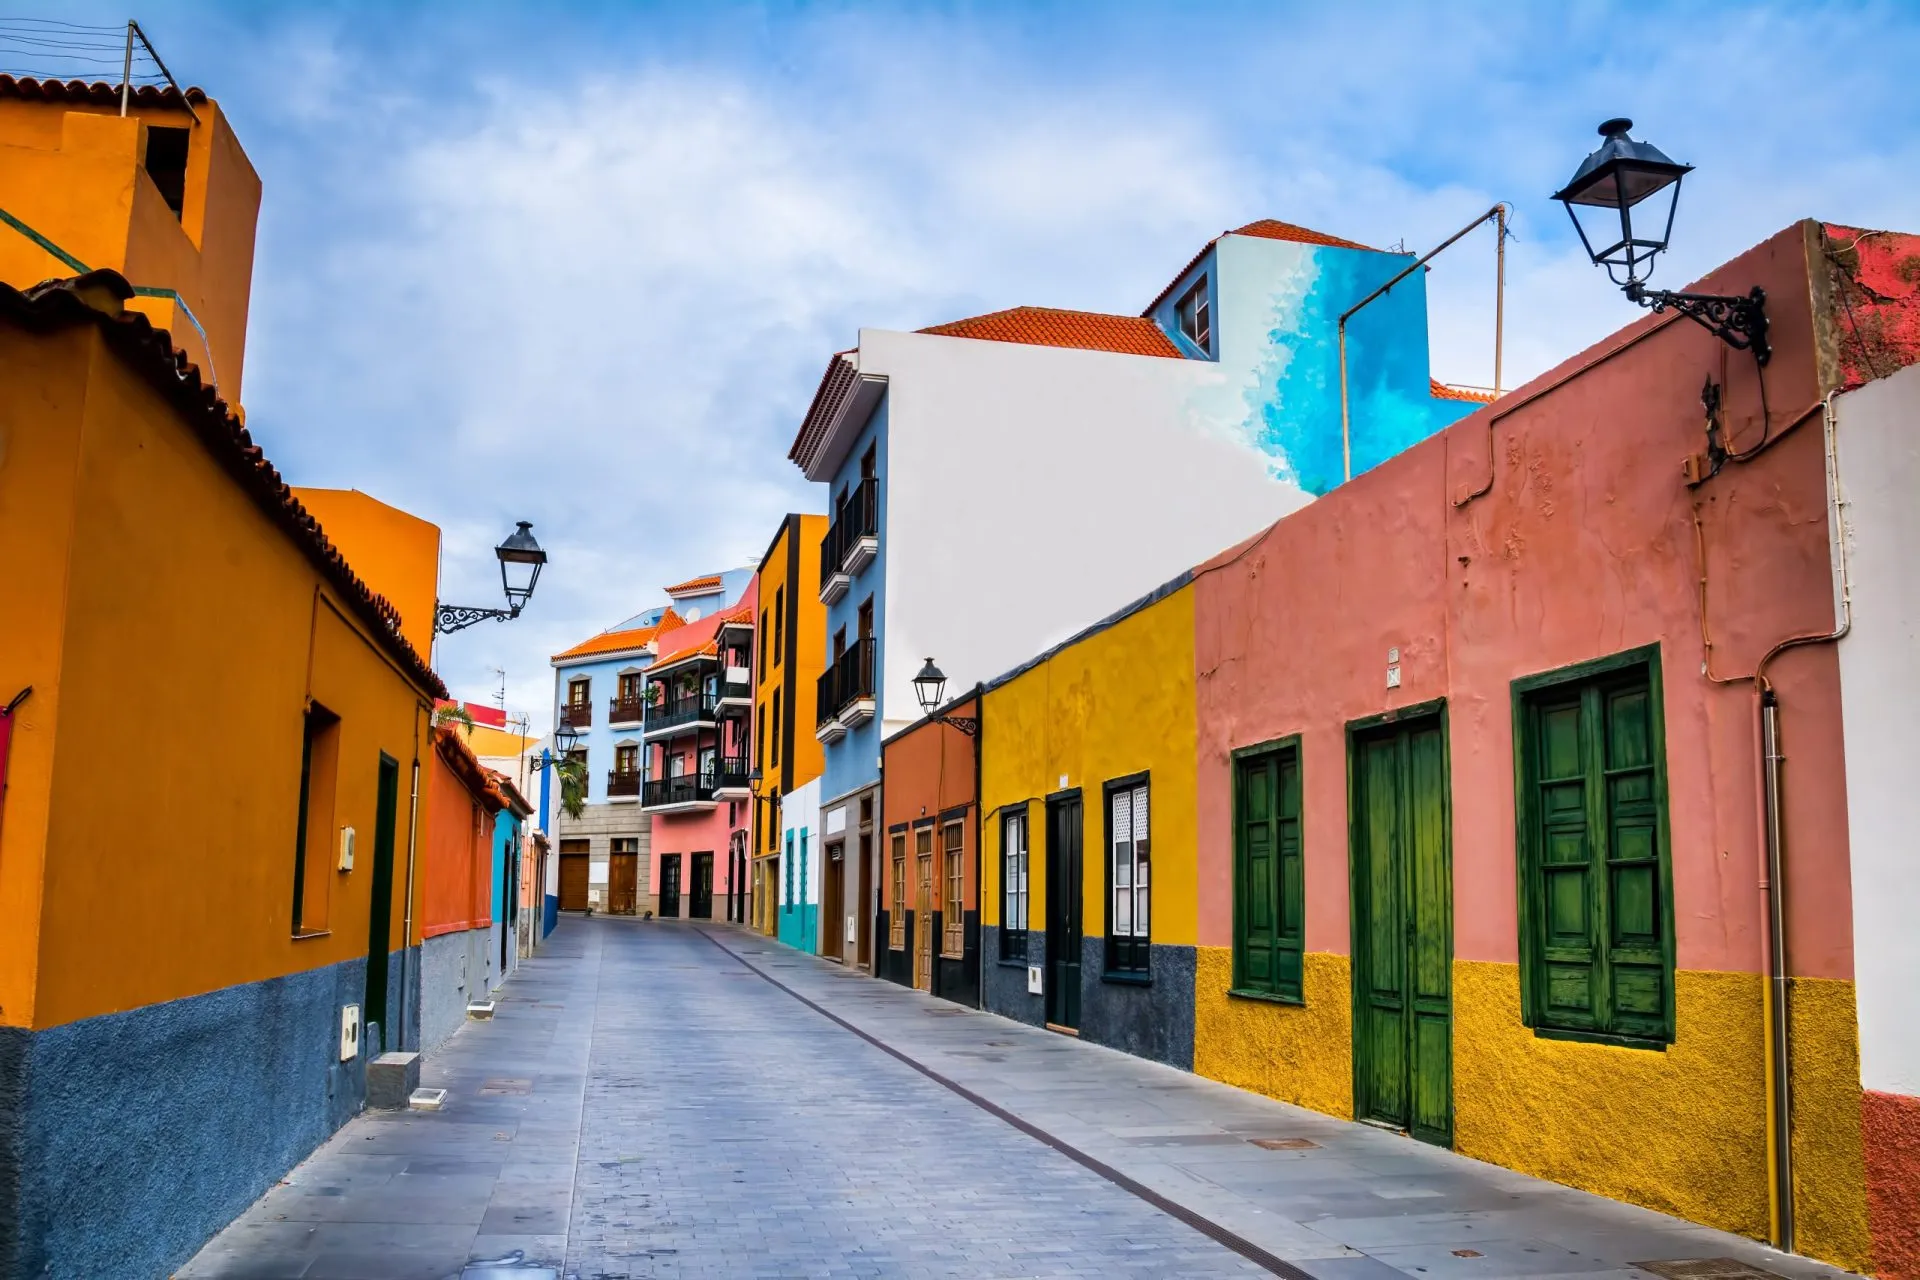 Colourful houses on street in Puerto de la Cruz town, Tenerife, Canary Islands, Spain. This is tourist pedestrian street near the ocean there are many restaurants and stores